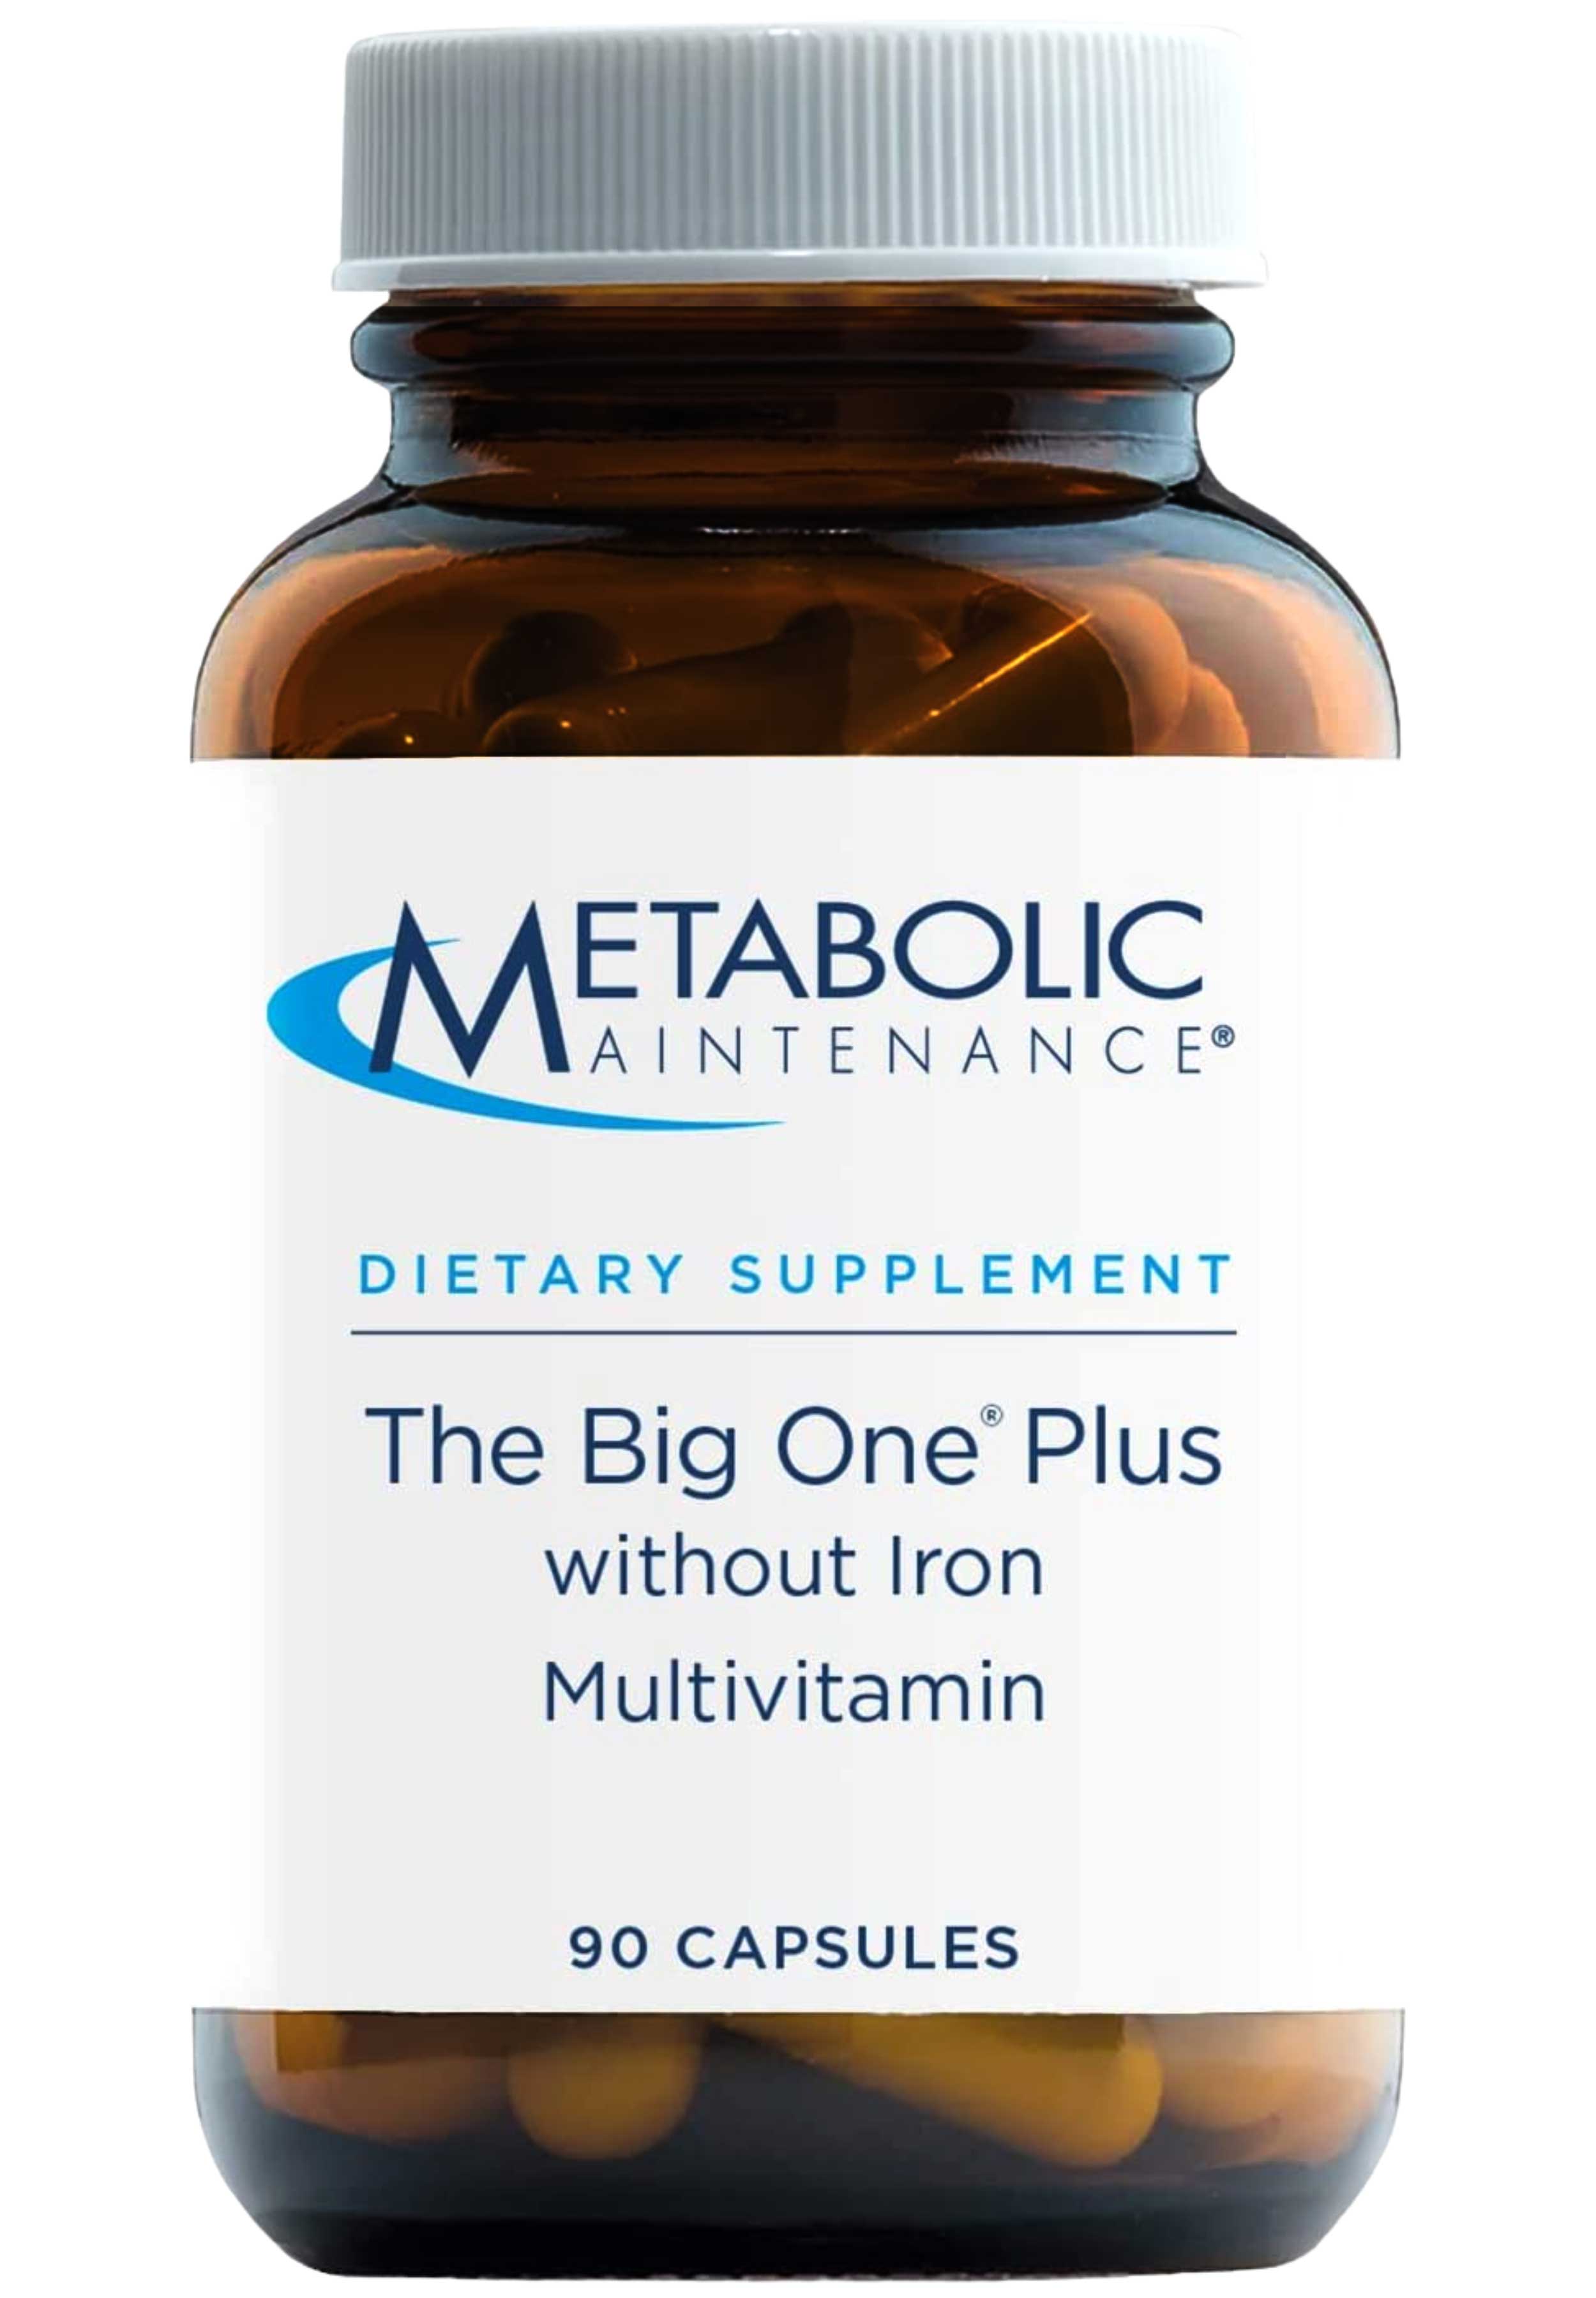 Metabolic Maintenance The Big One Plus without Iron Multivitamin